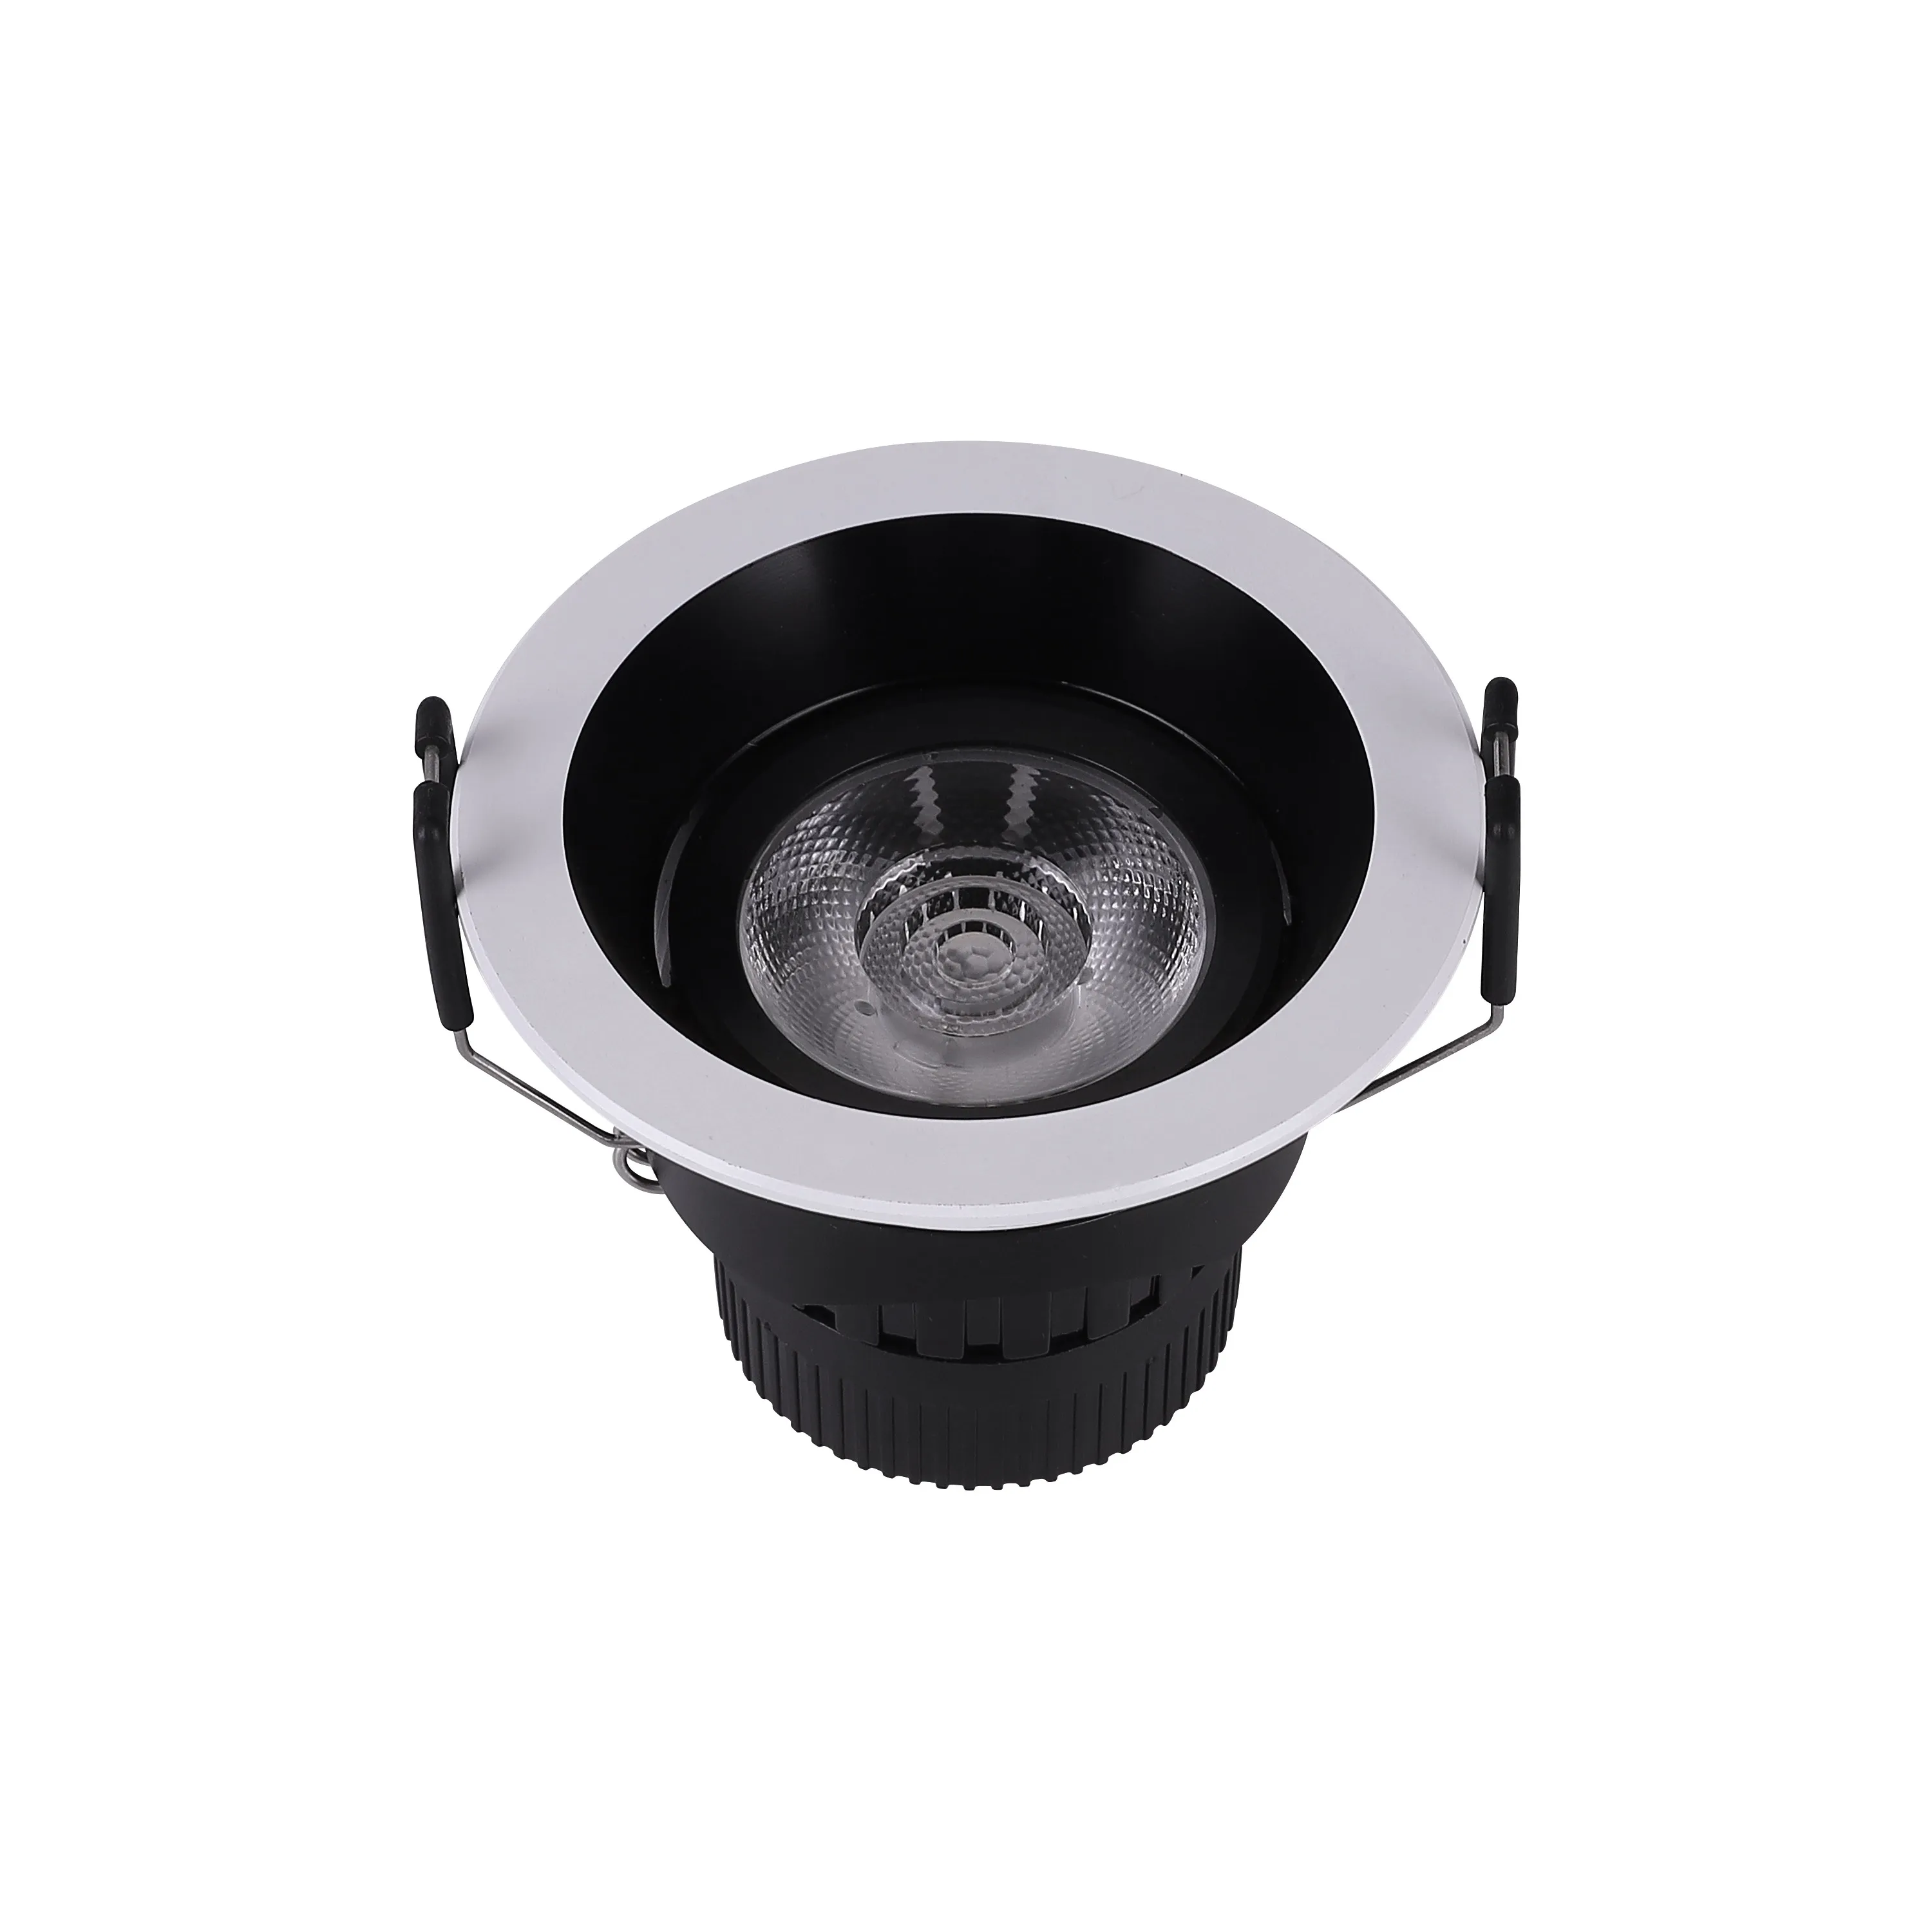 Mini Multilateral annulus color led 7w  Commercial Recessed Ceiling LED Down Light COB Spot Downlight